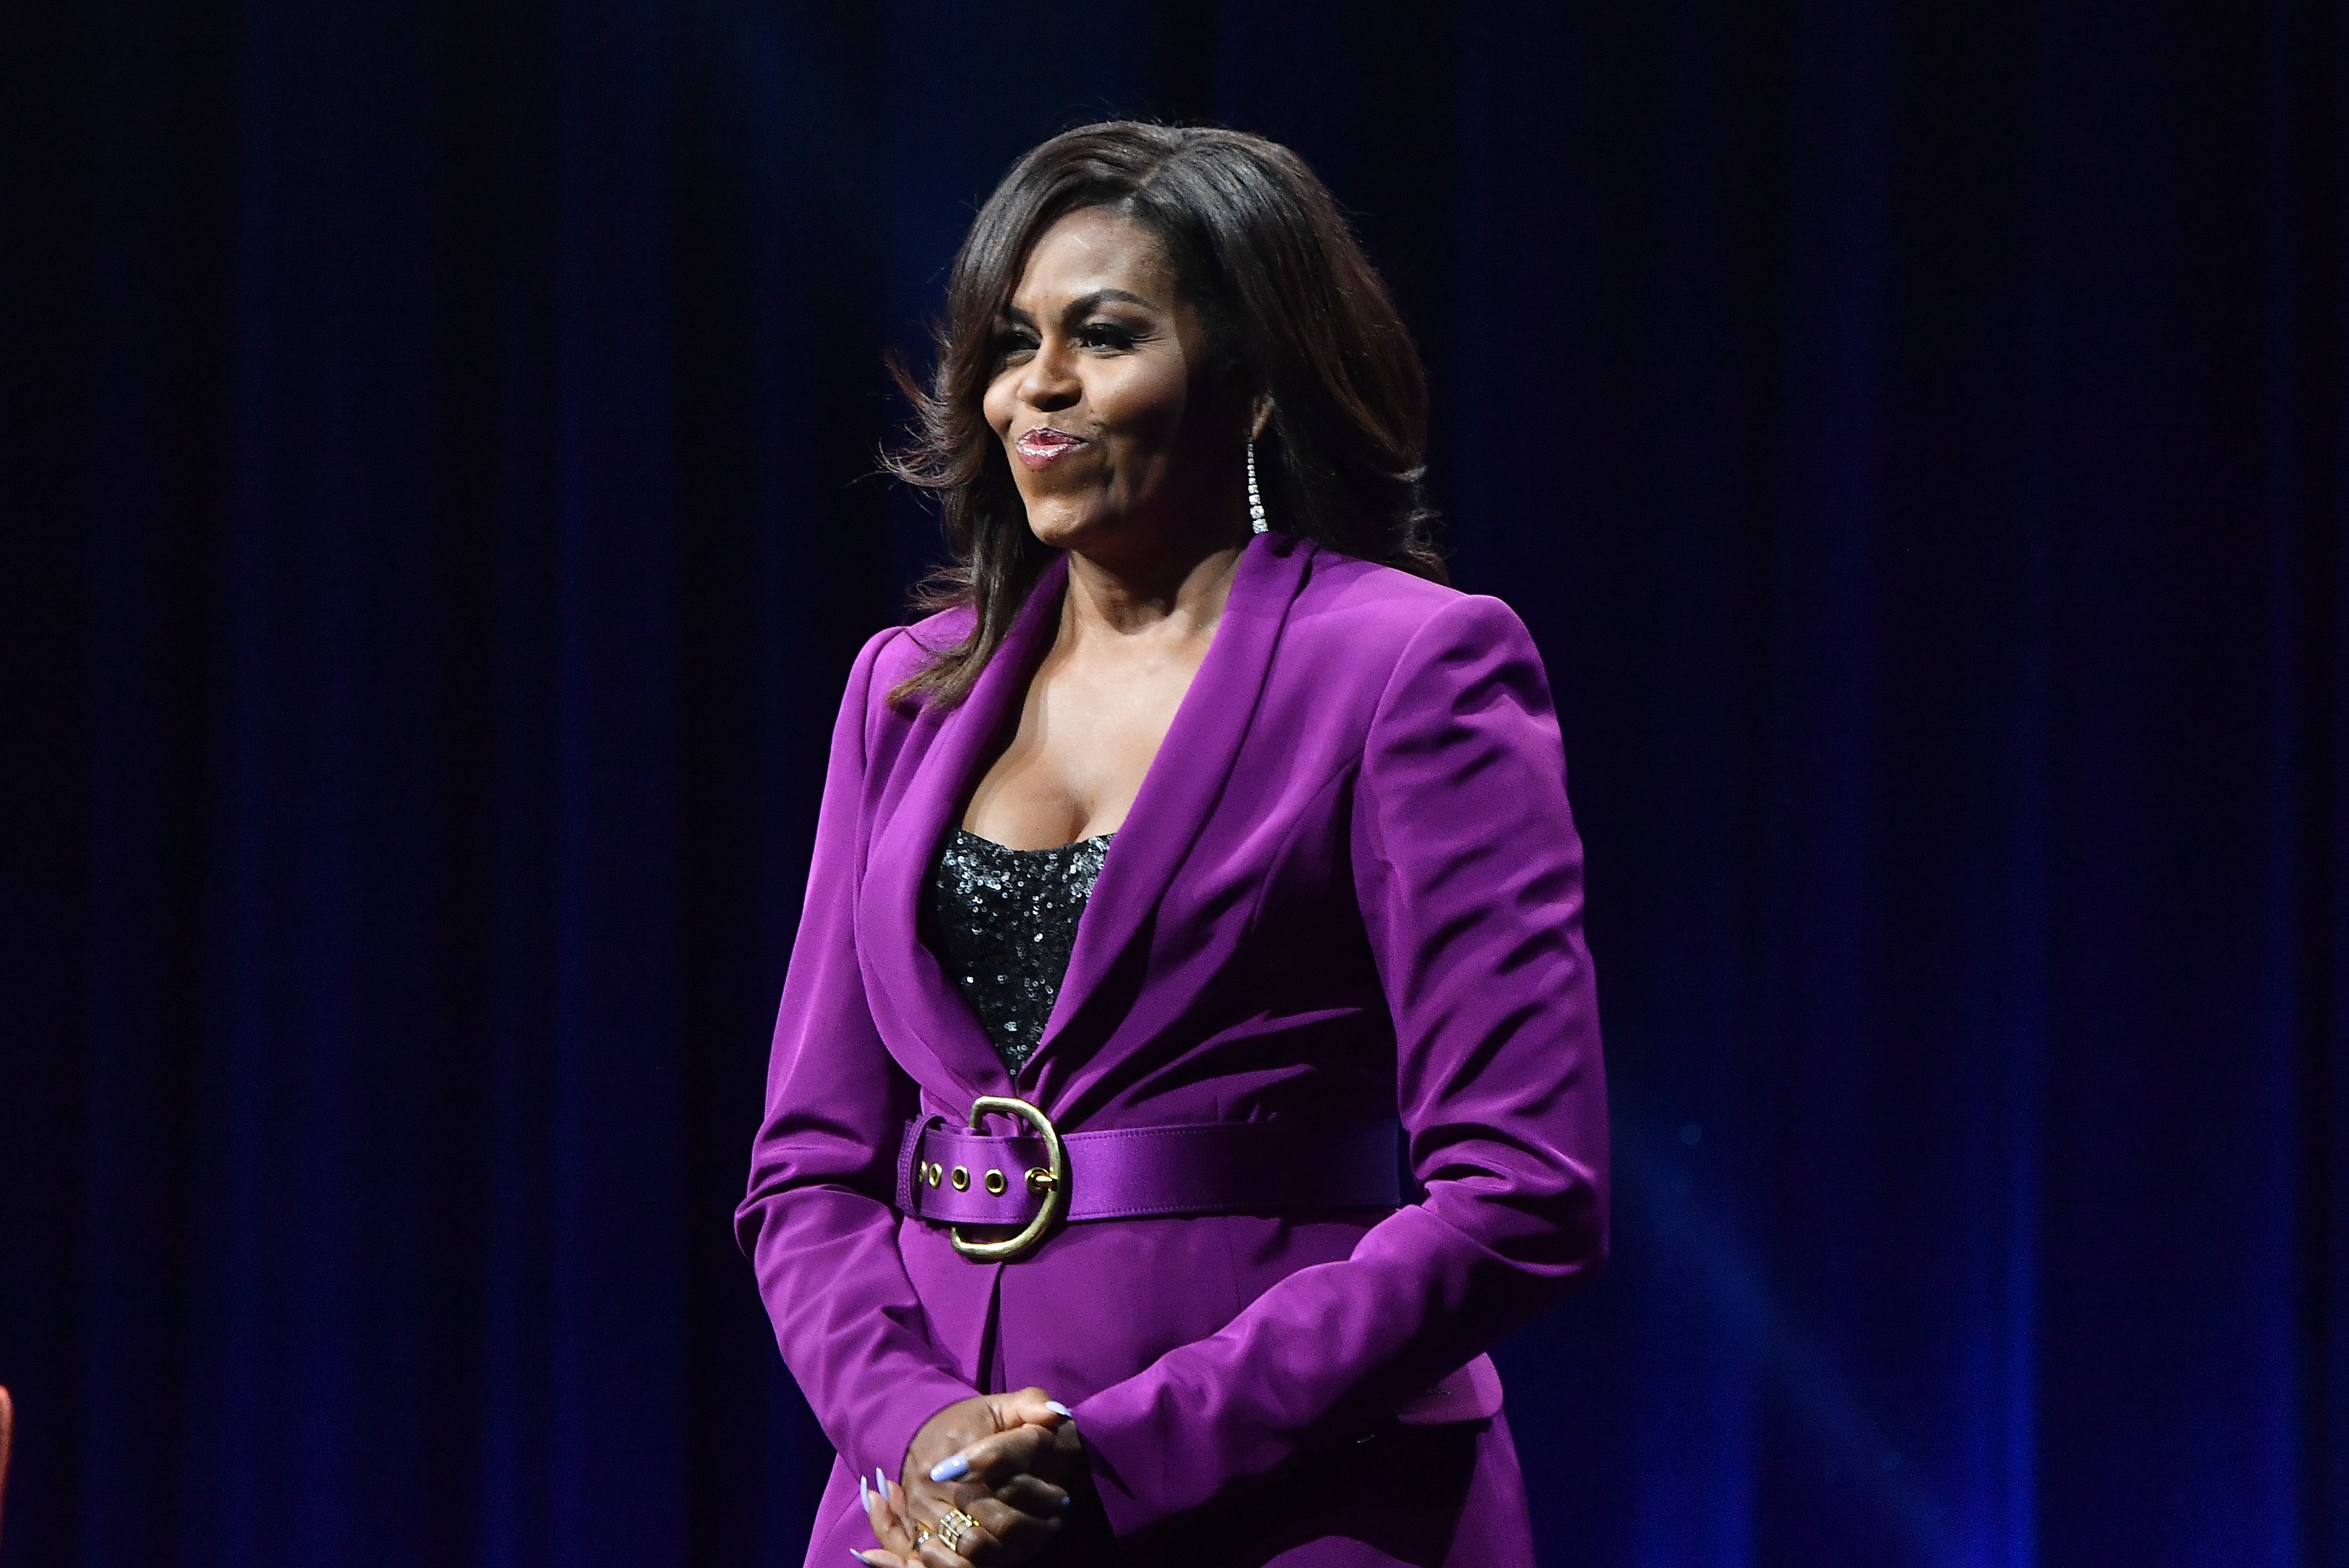 Michelle Obama at the 2019 Essence Festival. | Photo: GettyImages